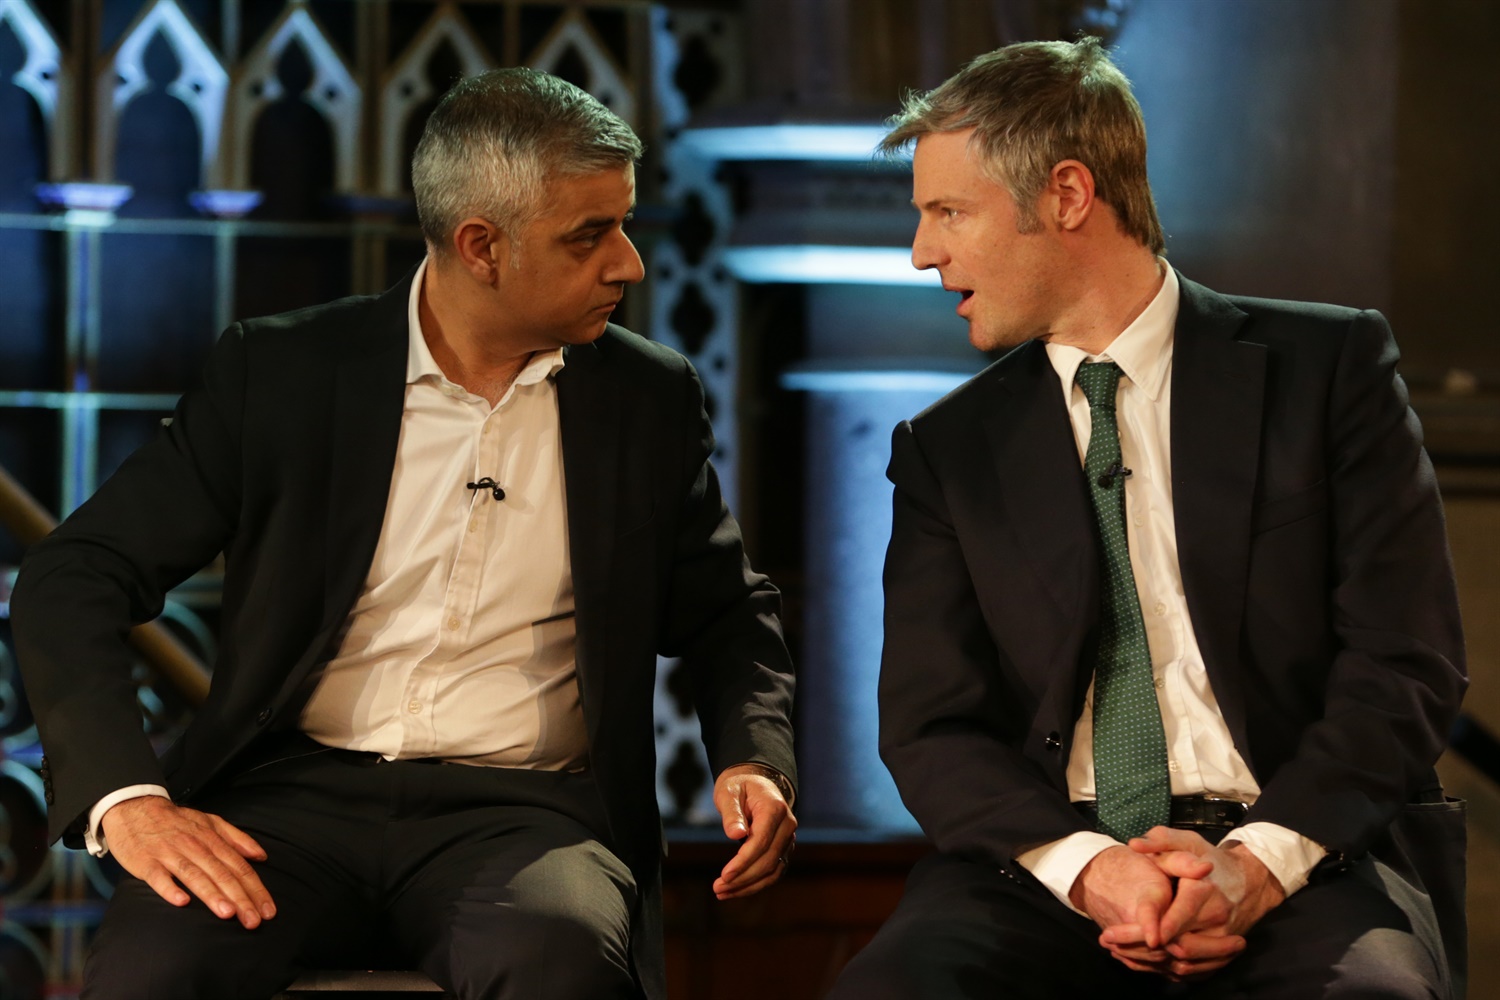 TfL under attack from London mayoral candidates